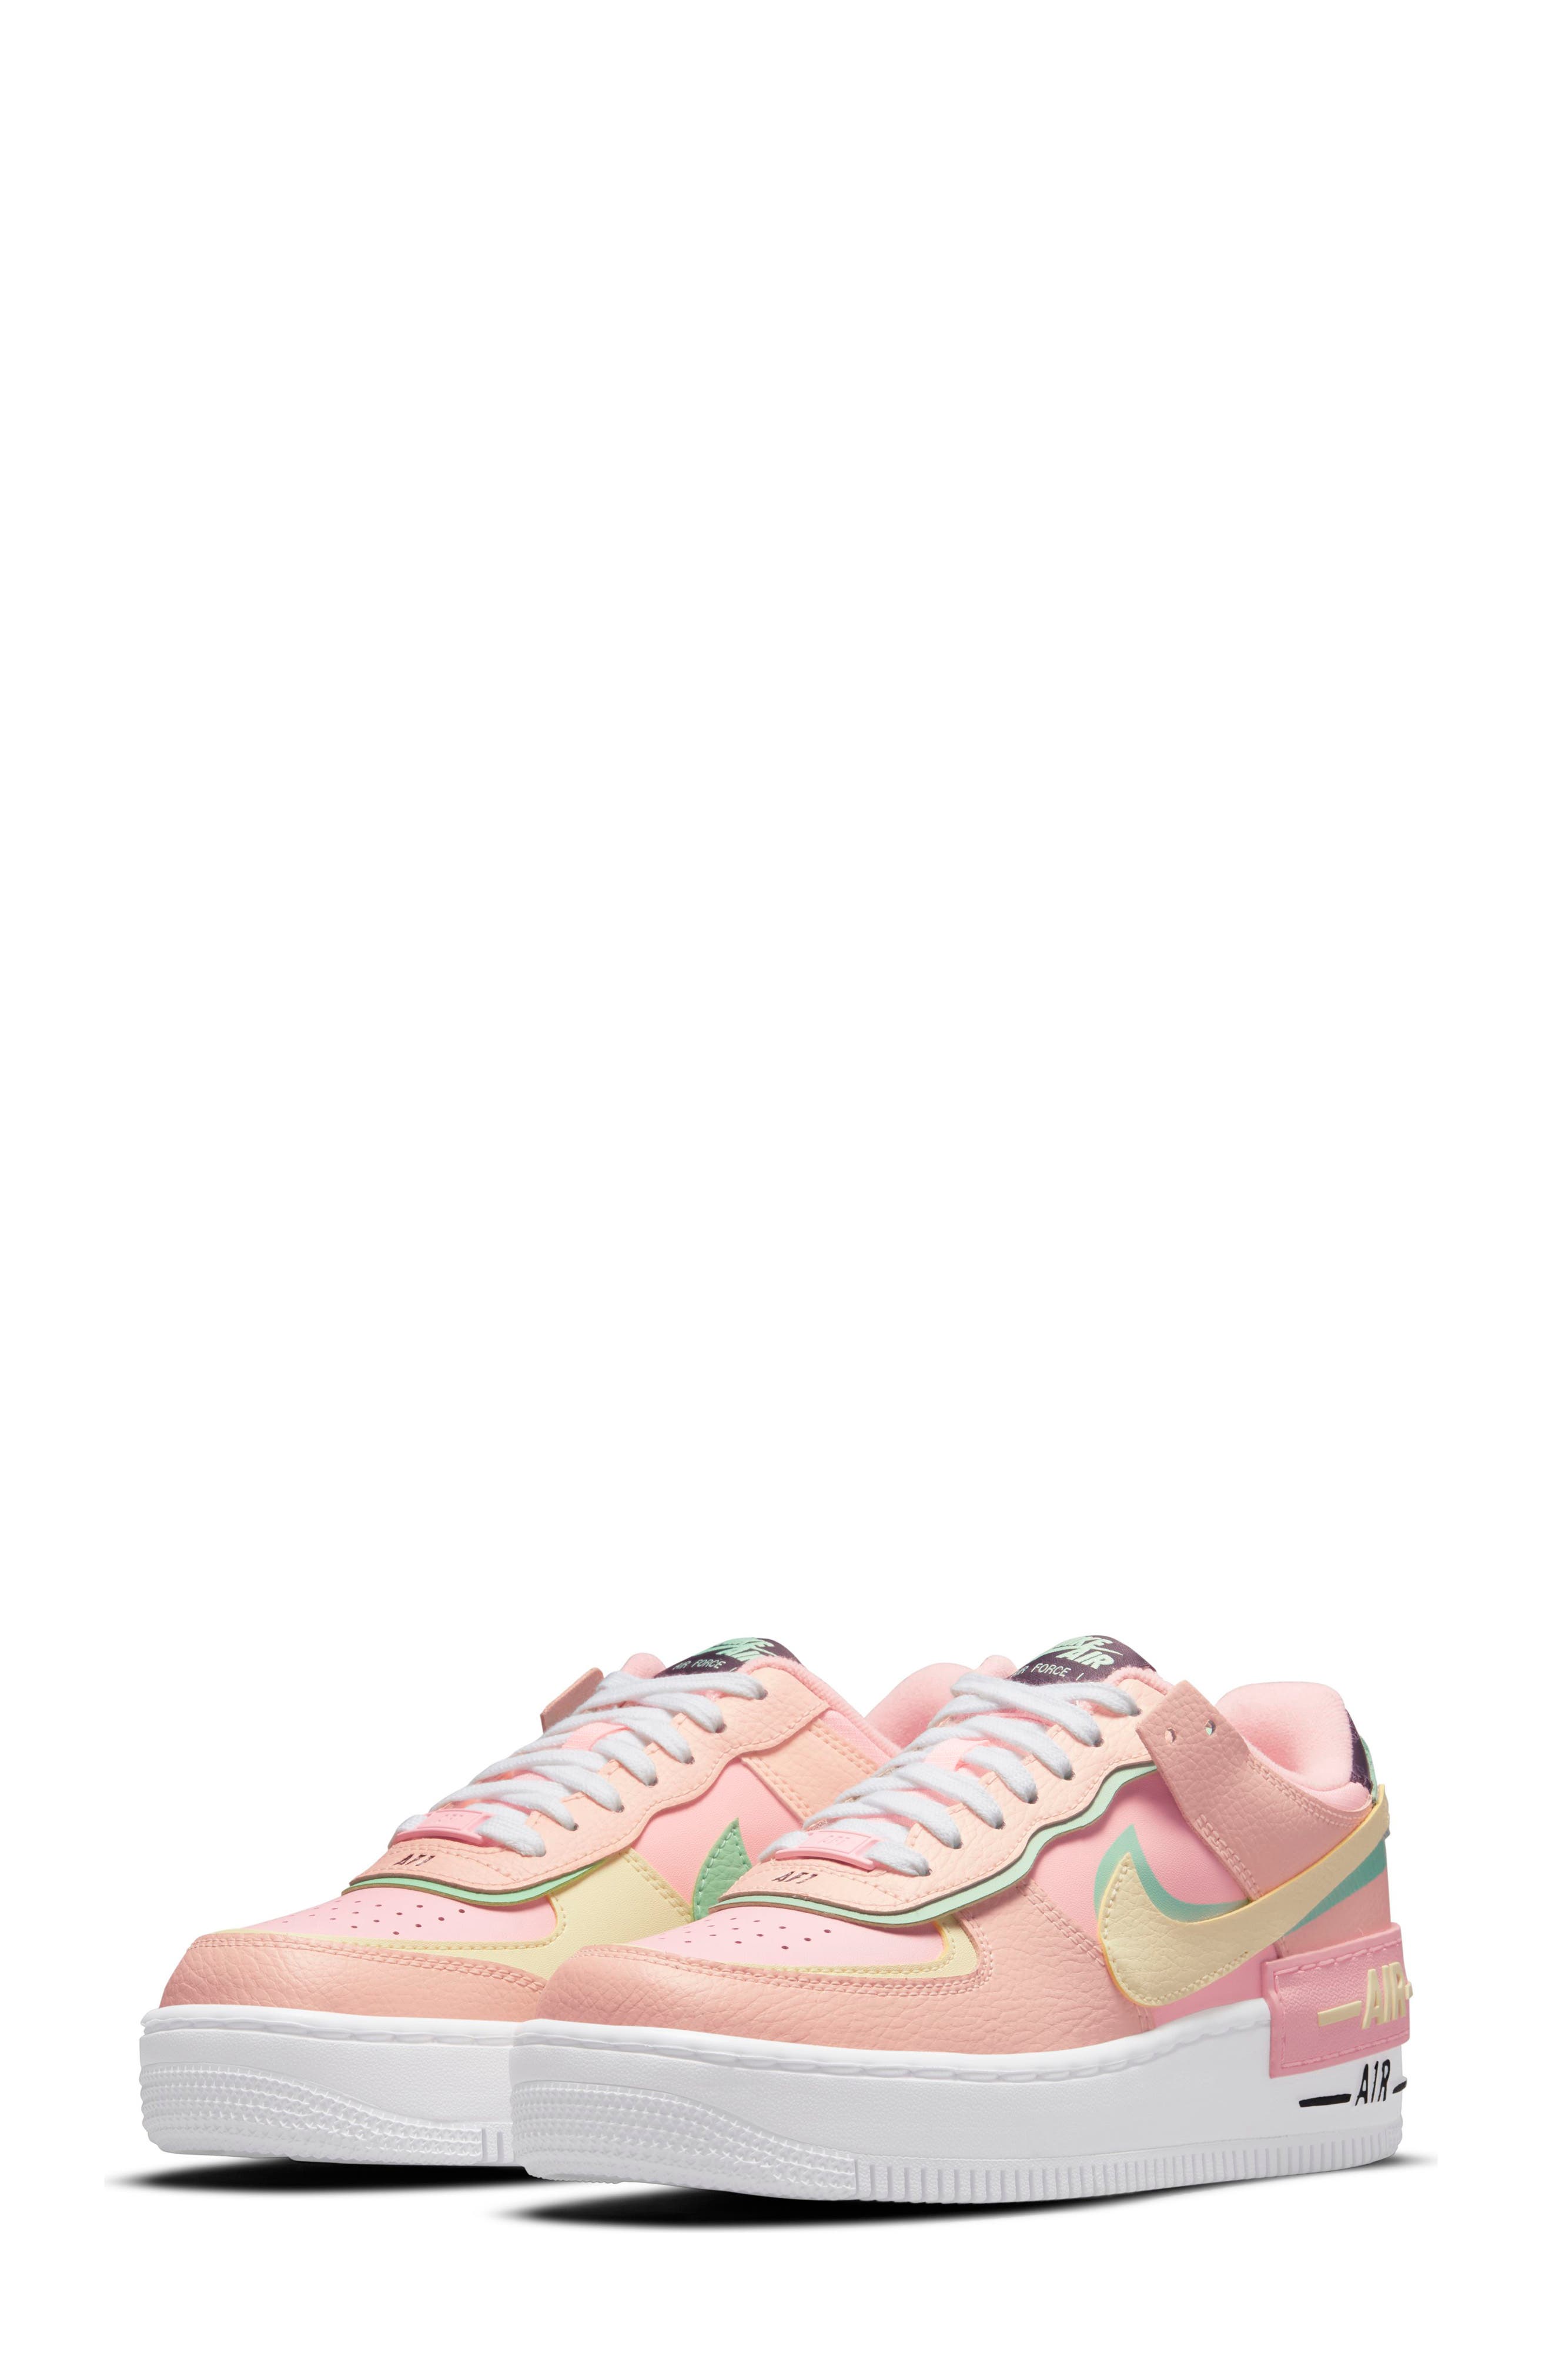 white and pink sneakers